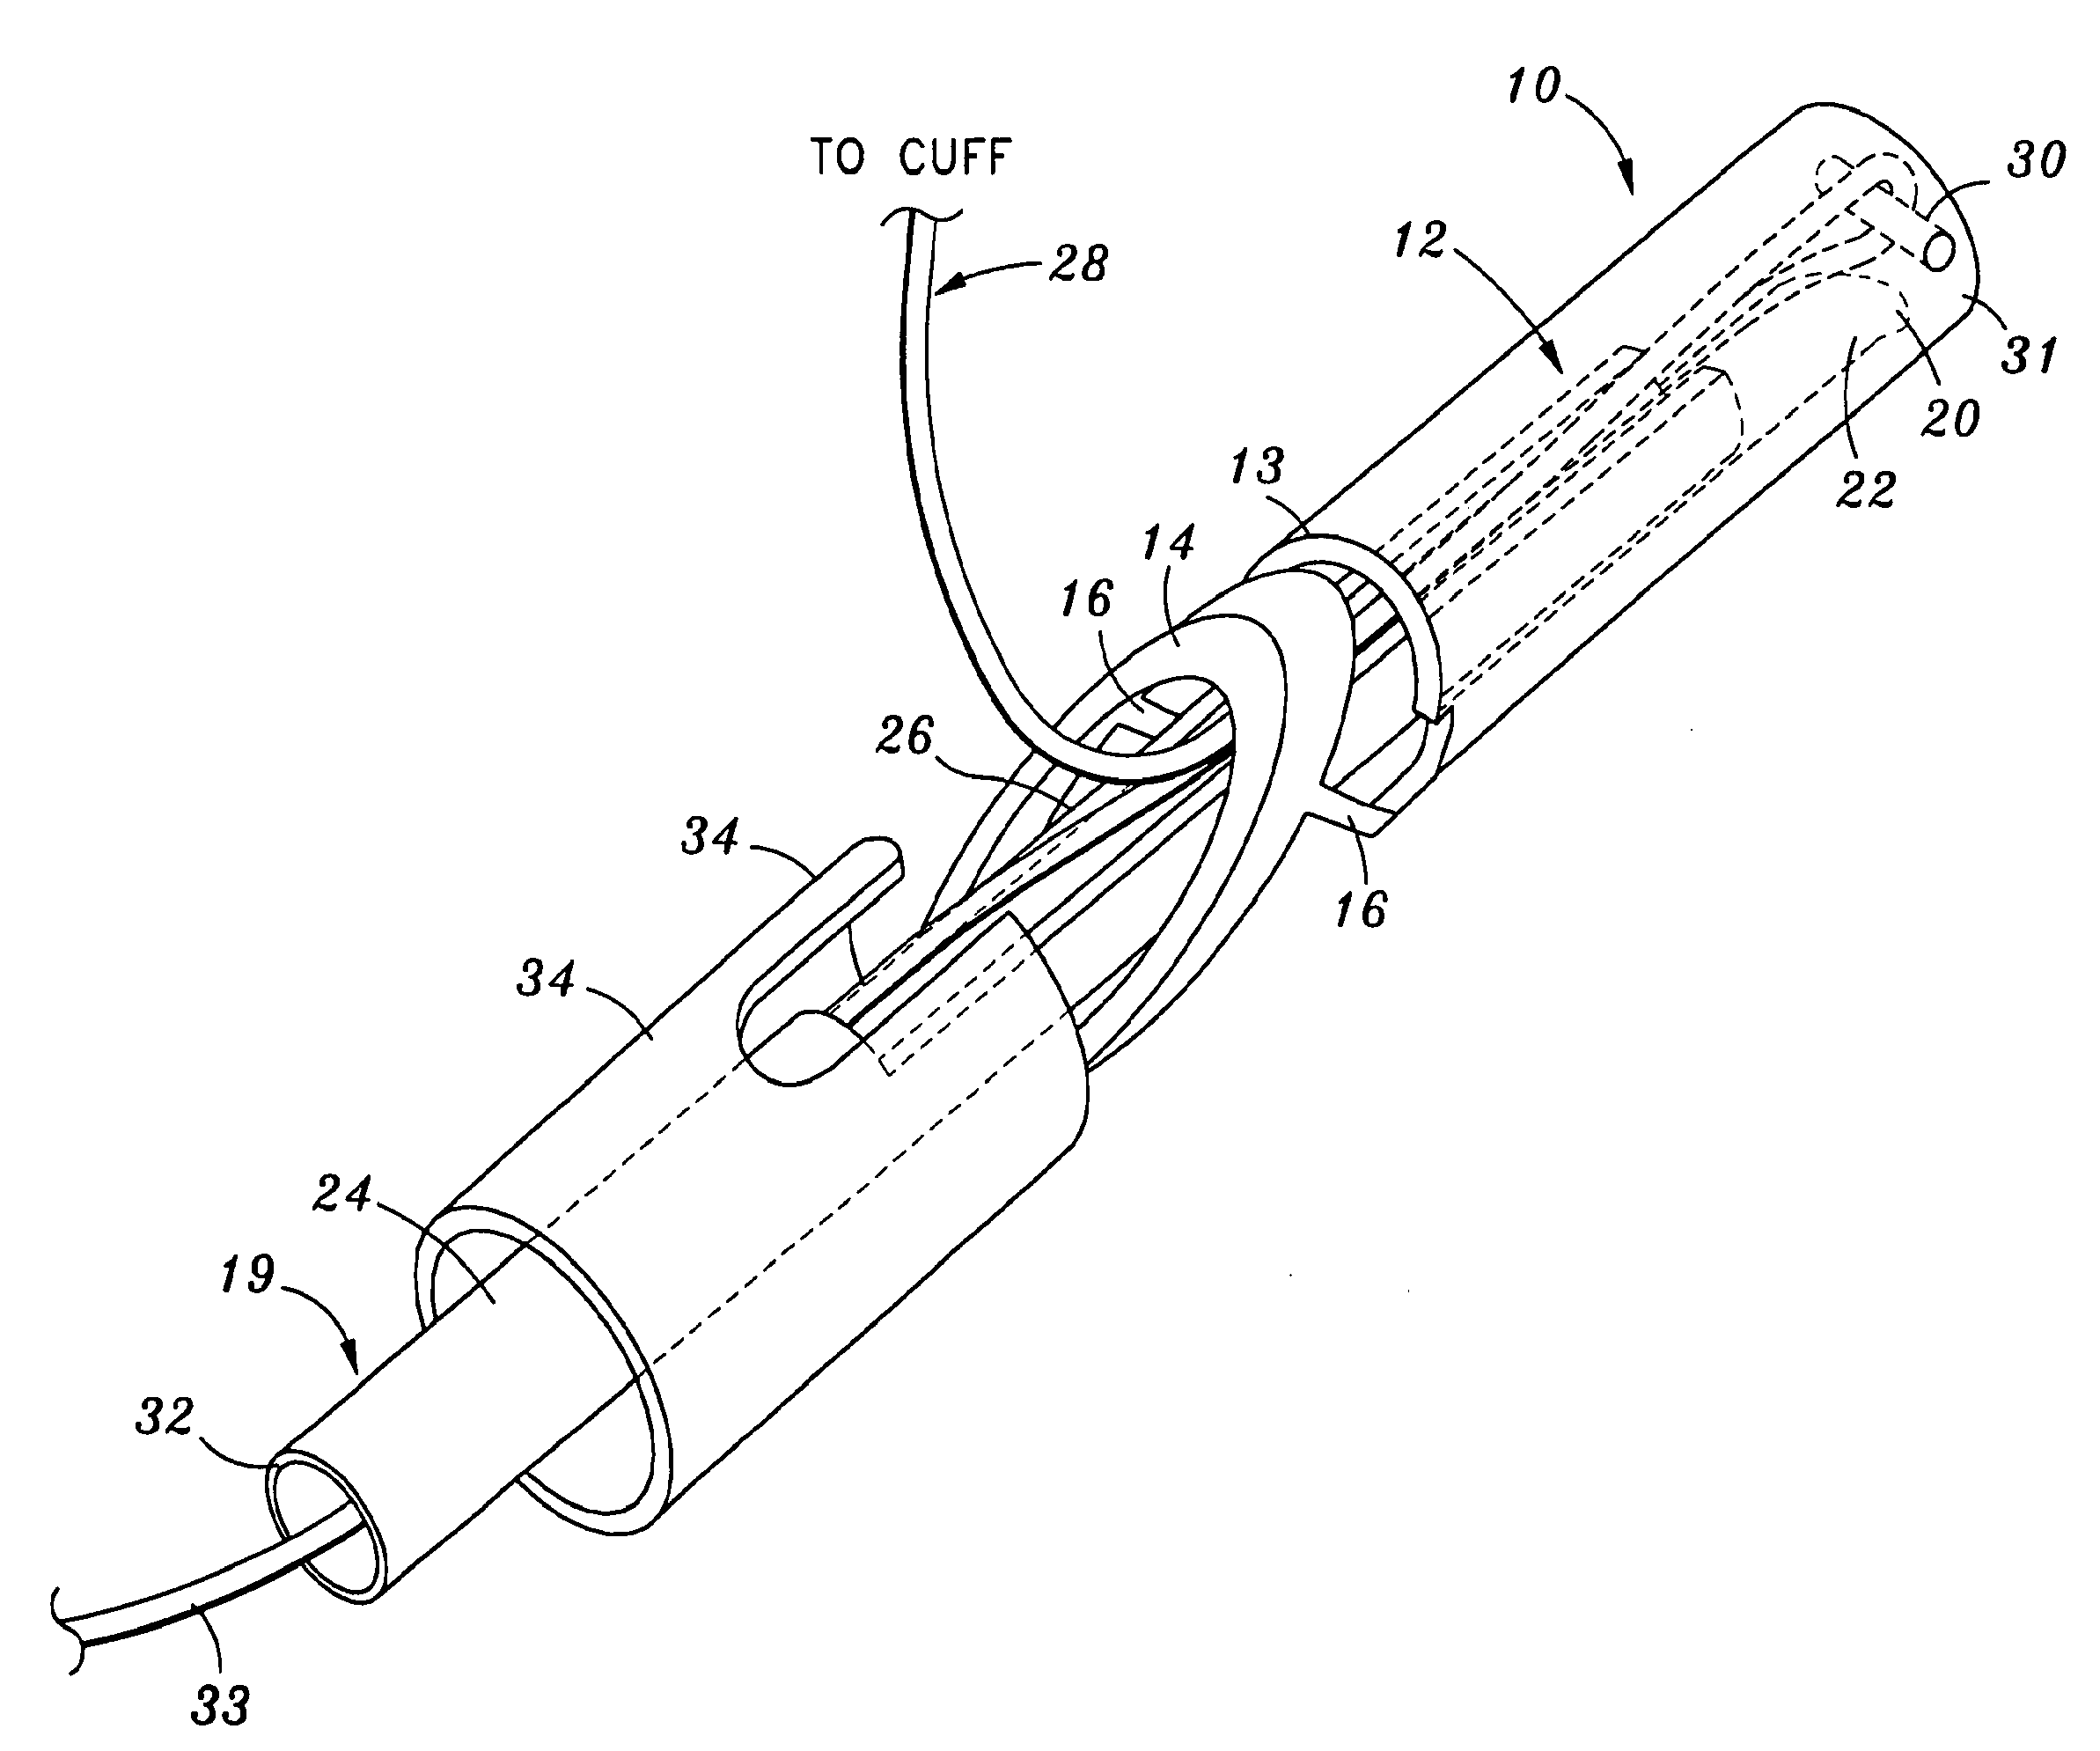 Methods and devices for attaching connective tissues to bone using a knotless suture anchoring device